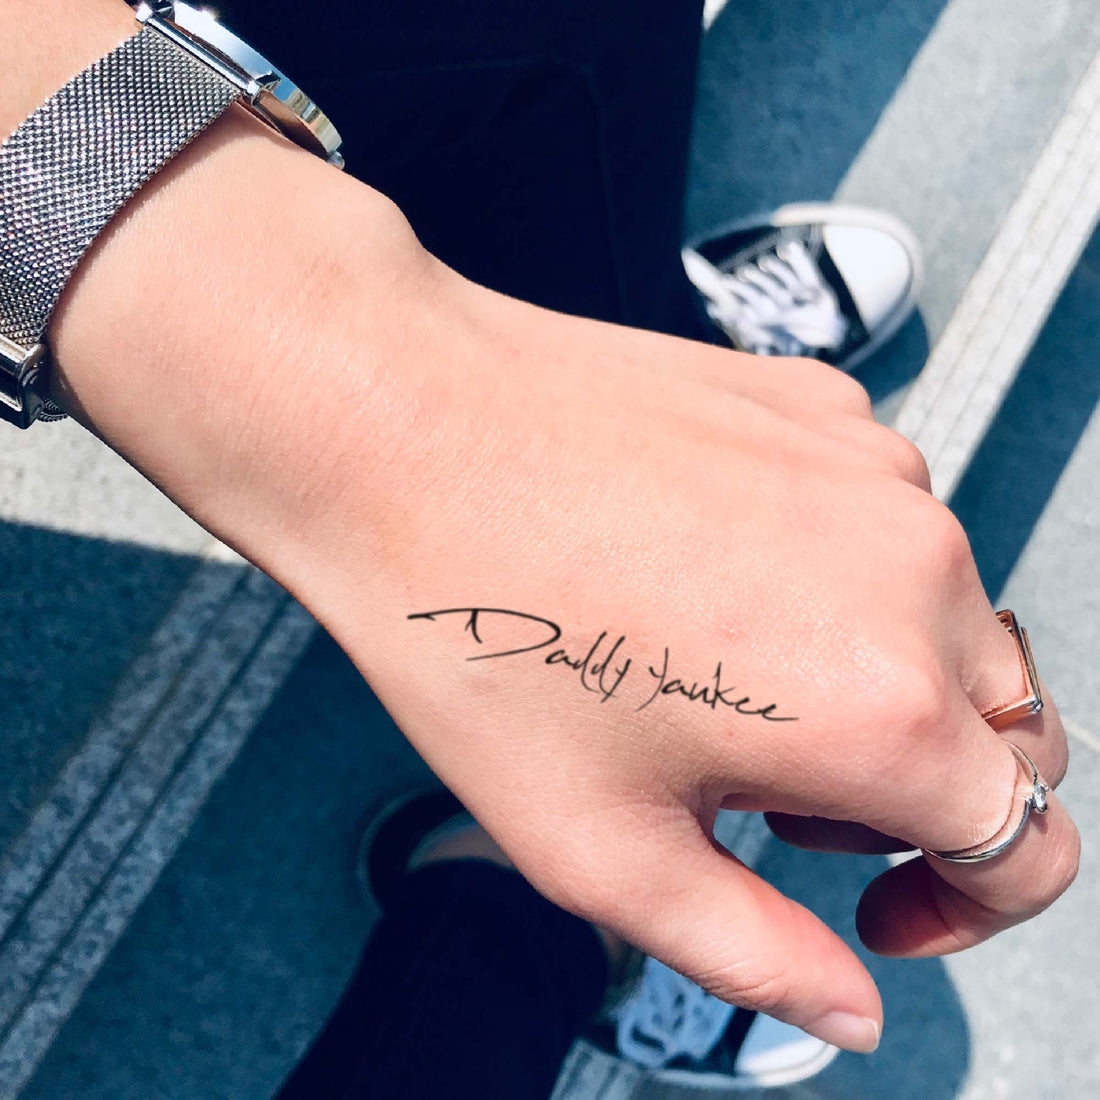 Daddy Yankee custom temporary tattoo sticker design idea inspiration meanings removal arm wrist hand words font name signature calligraphy lyrics tour concert outfits merch accessory gift souvenir costumes wear dress up code